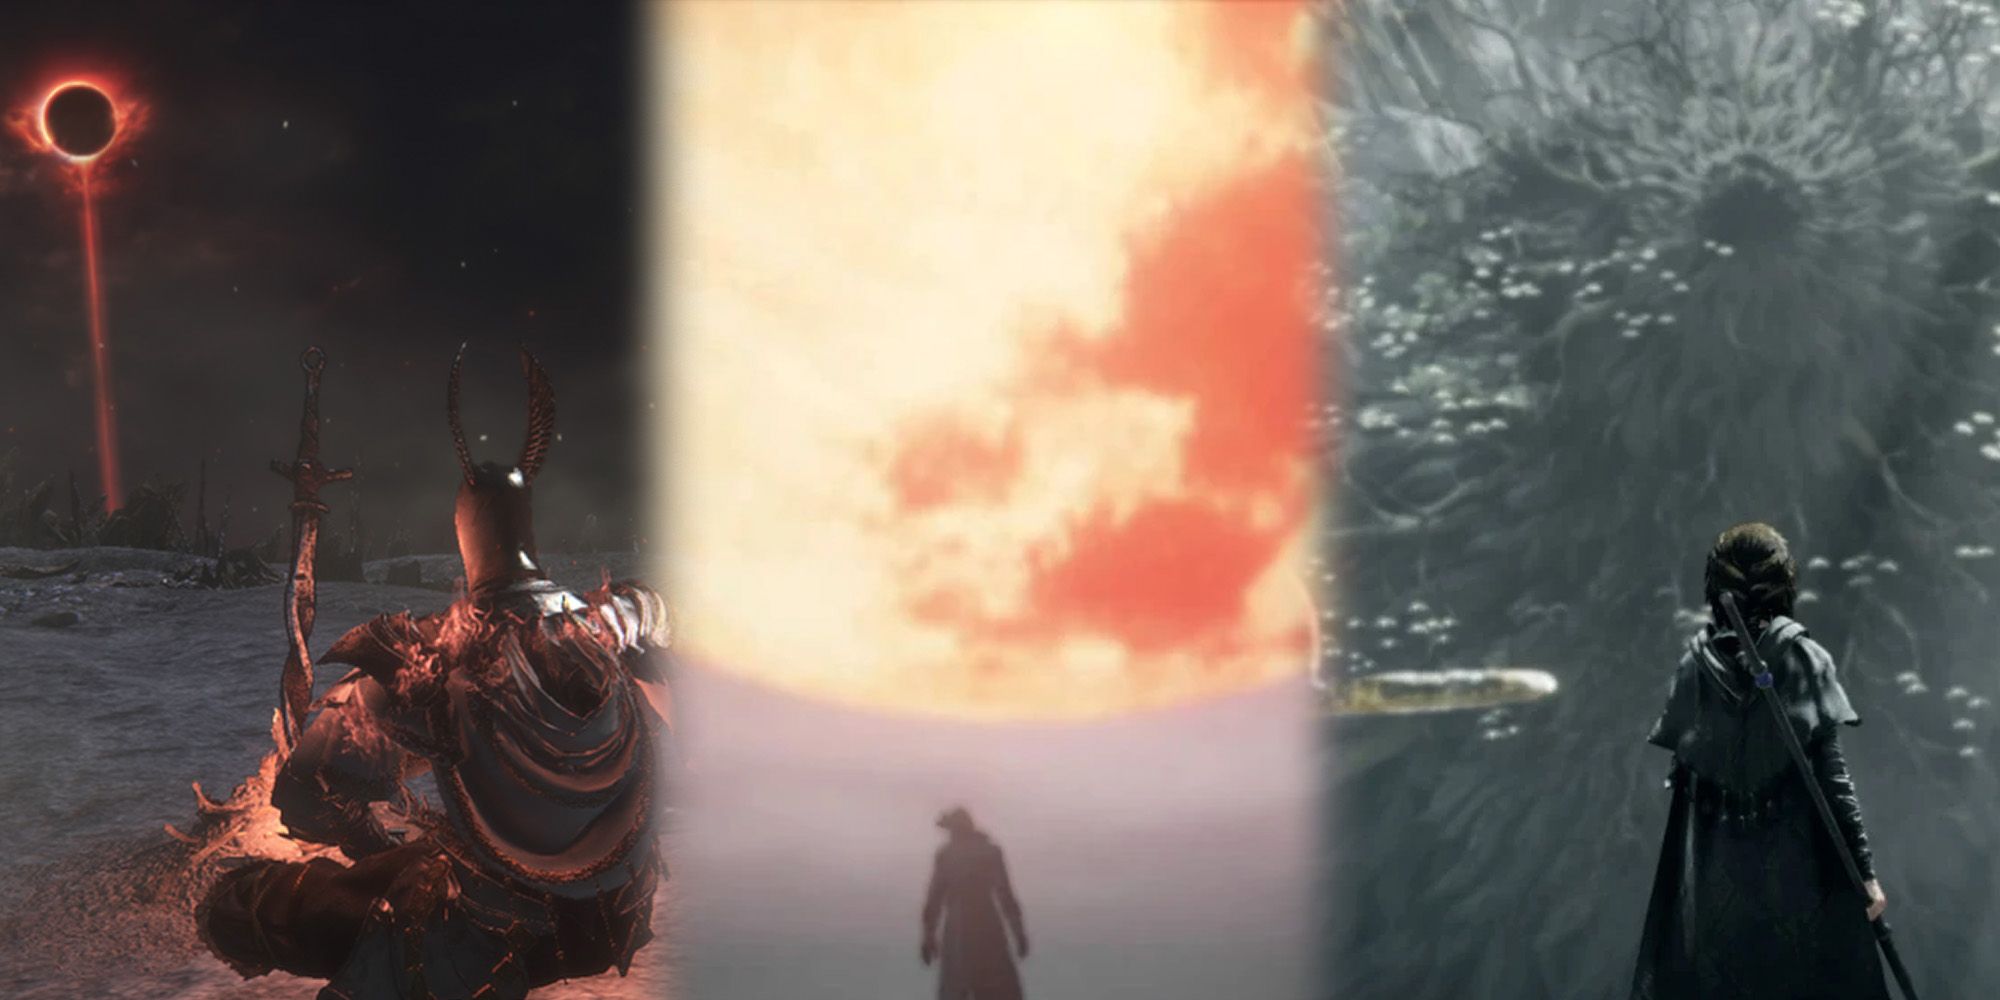 Elden Ring - Three Side By Side Images Of Linking the Flame in Ds3, Having the Moon Descend after Rhom in Bloodborne, Waking the Old One in Demons' Souls